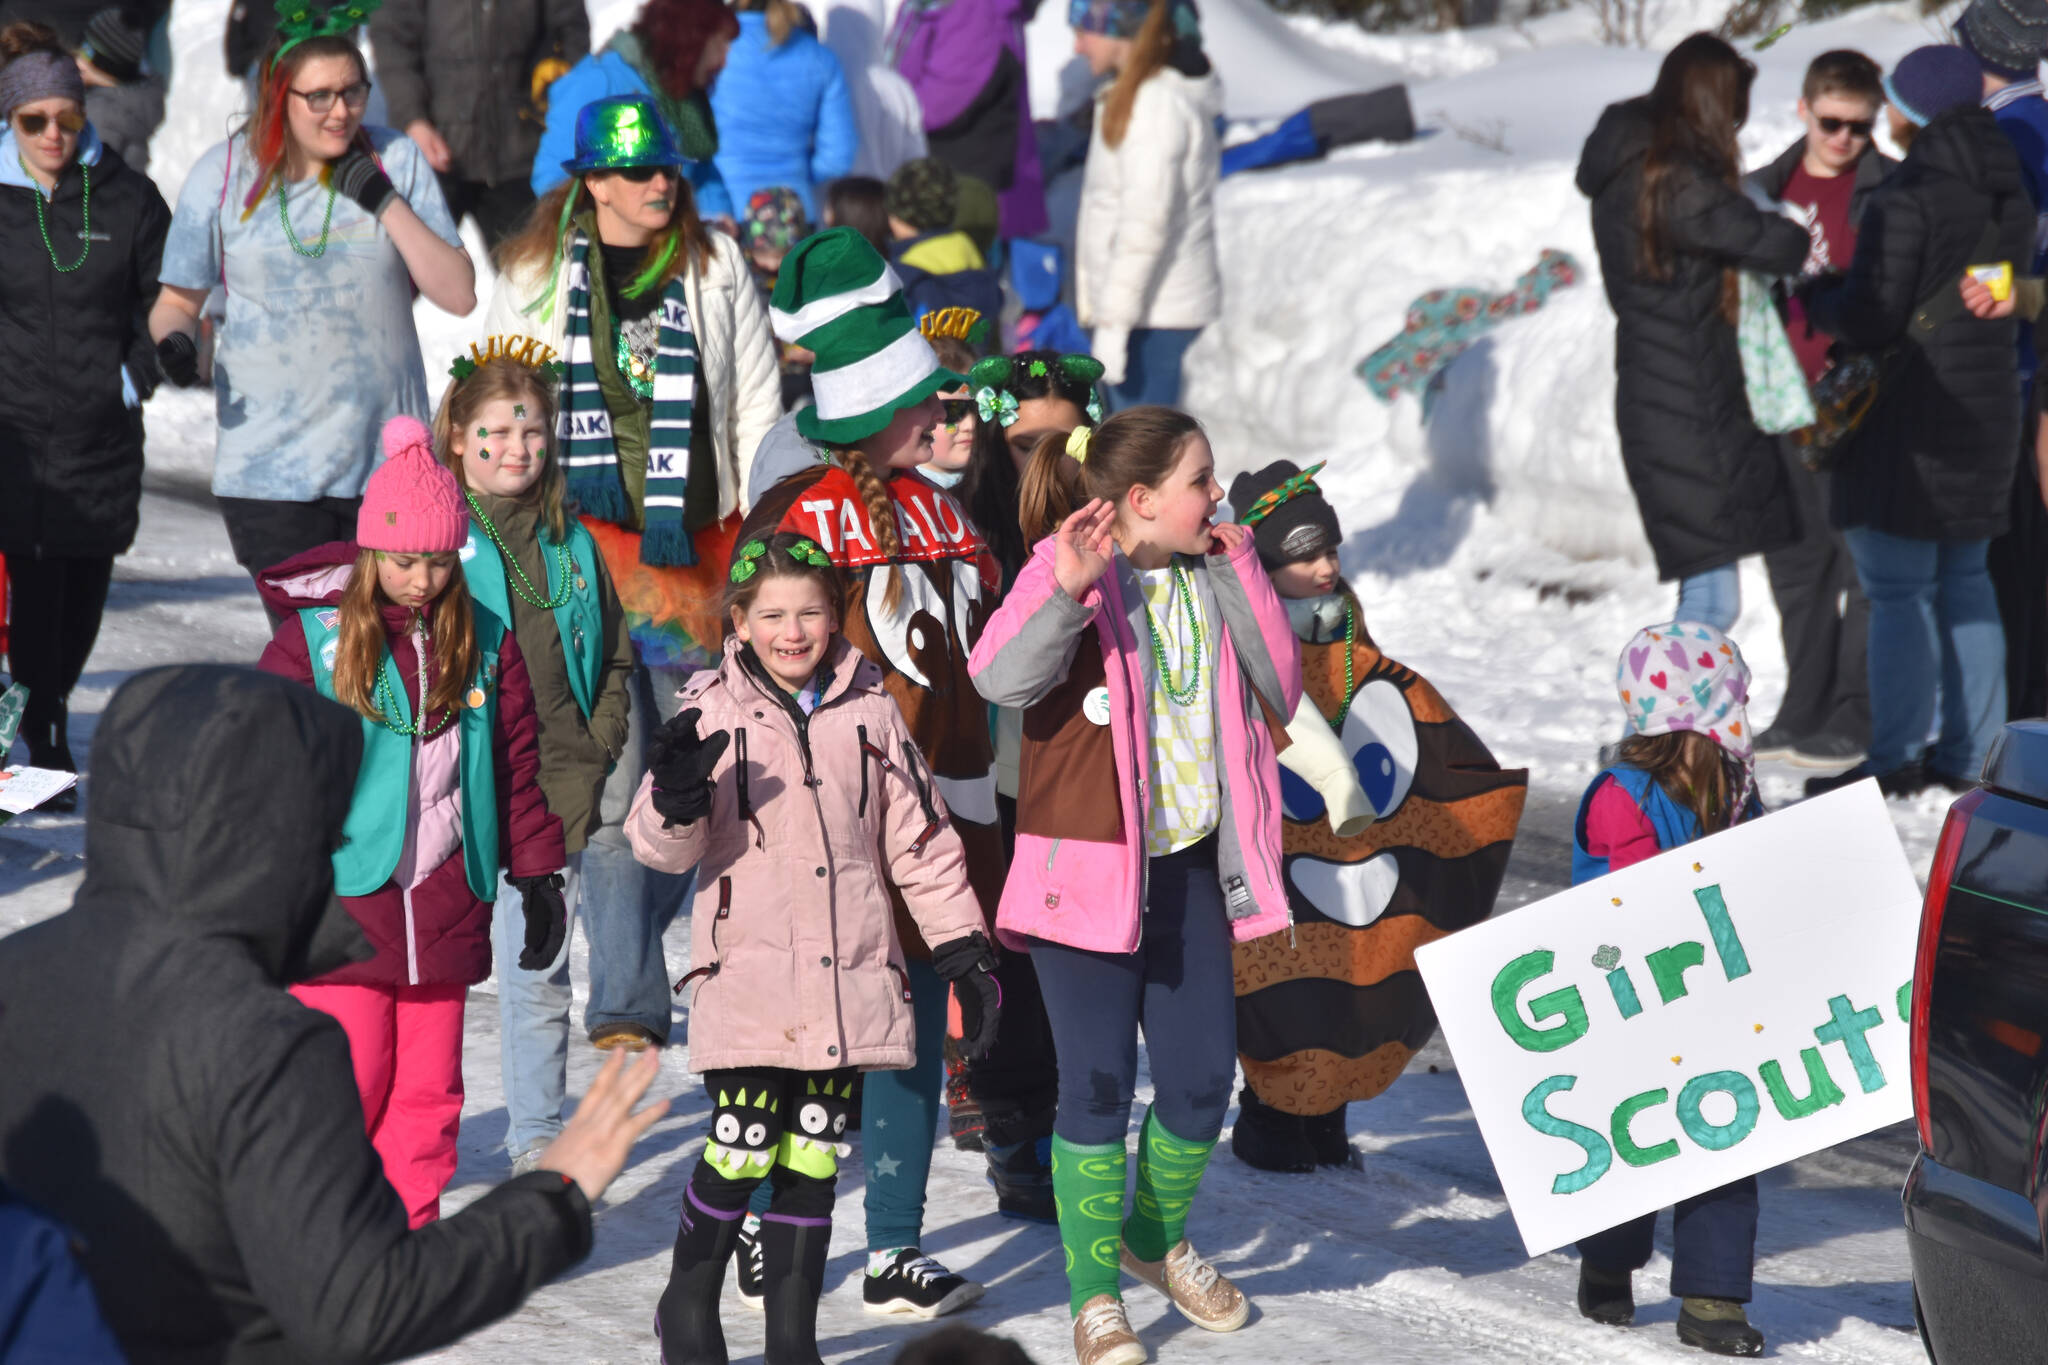 Children walk and wave as the 32nd annual Sweeney’s St. Patrick’s Day Parade proceeds down Fireweed Street in Soldotna, Alaska on Friday, March 17, 2023. (Jake Dye/Peninsula Clarion)